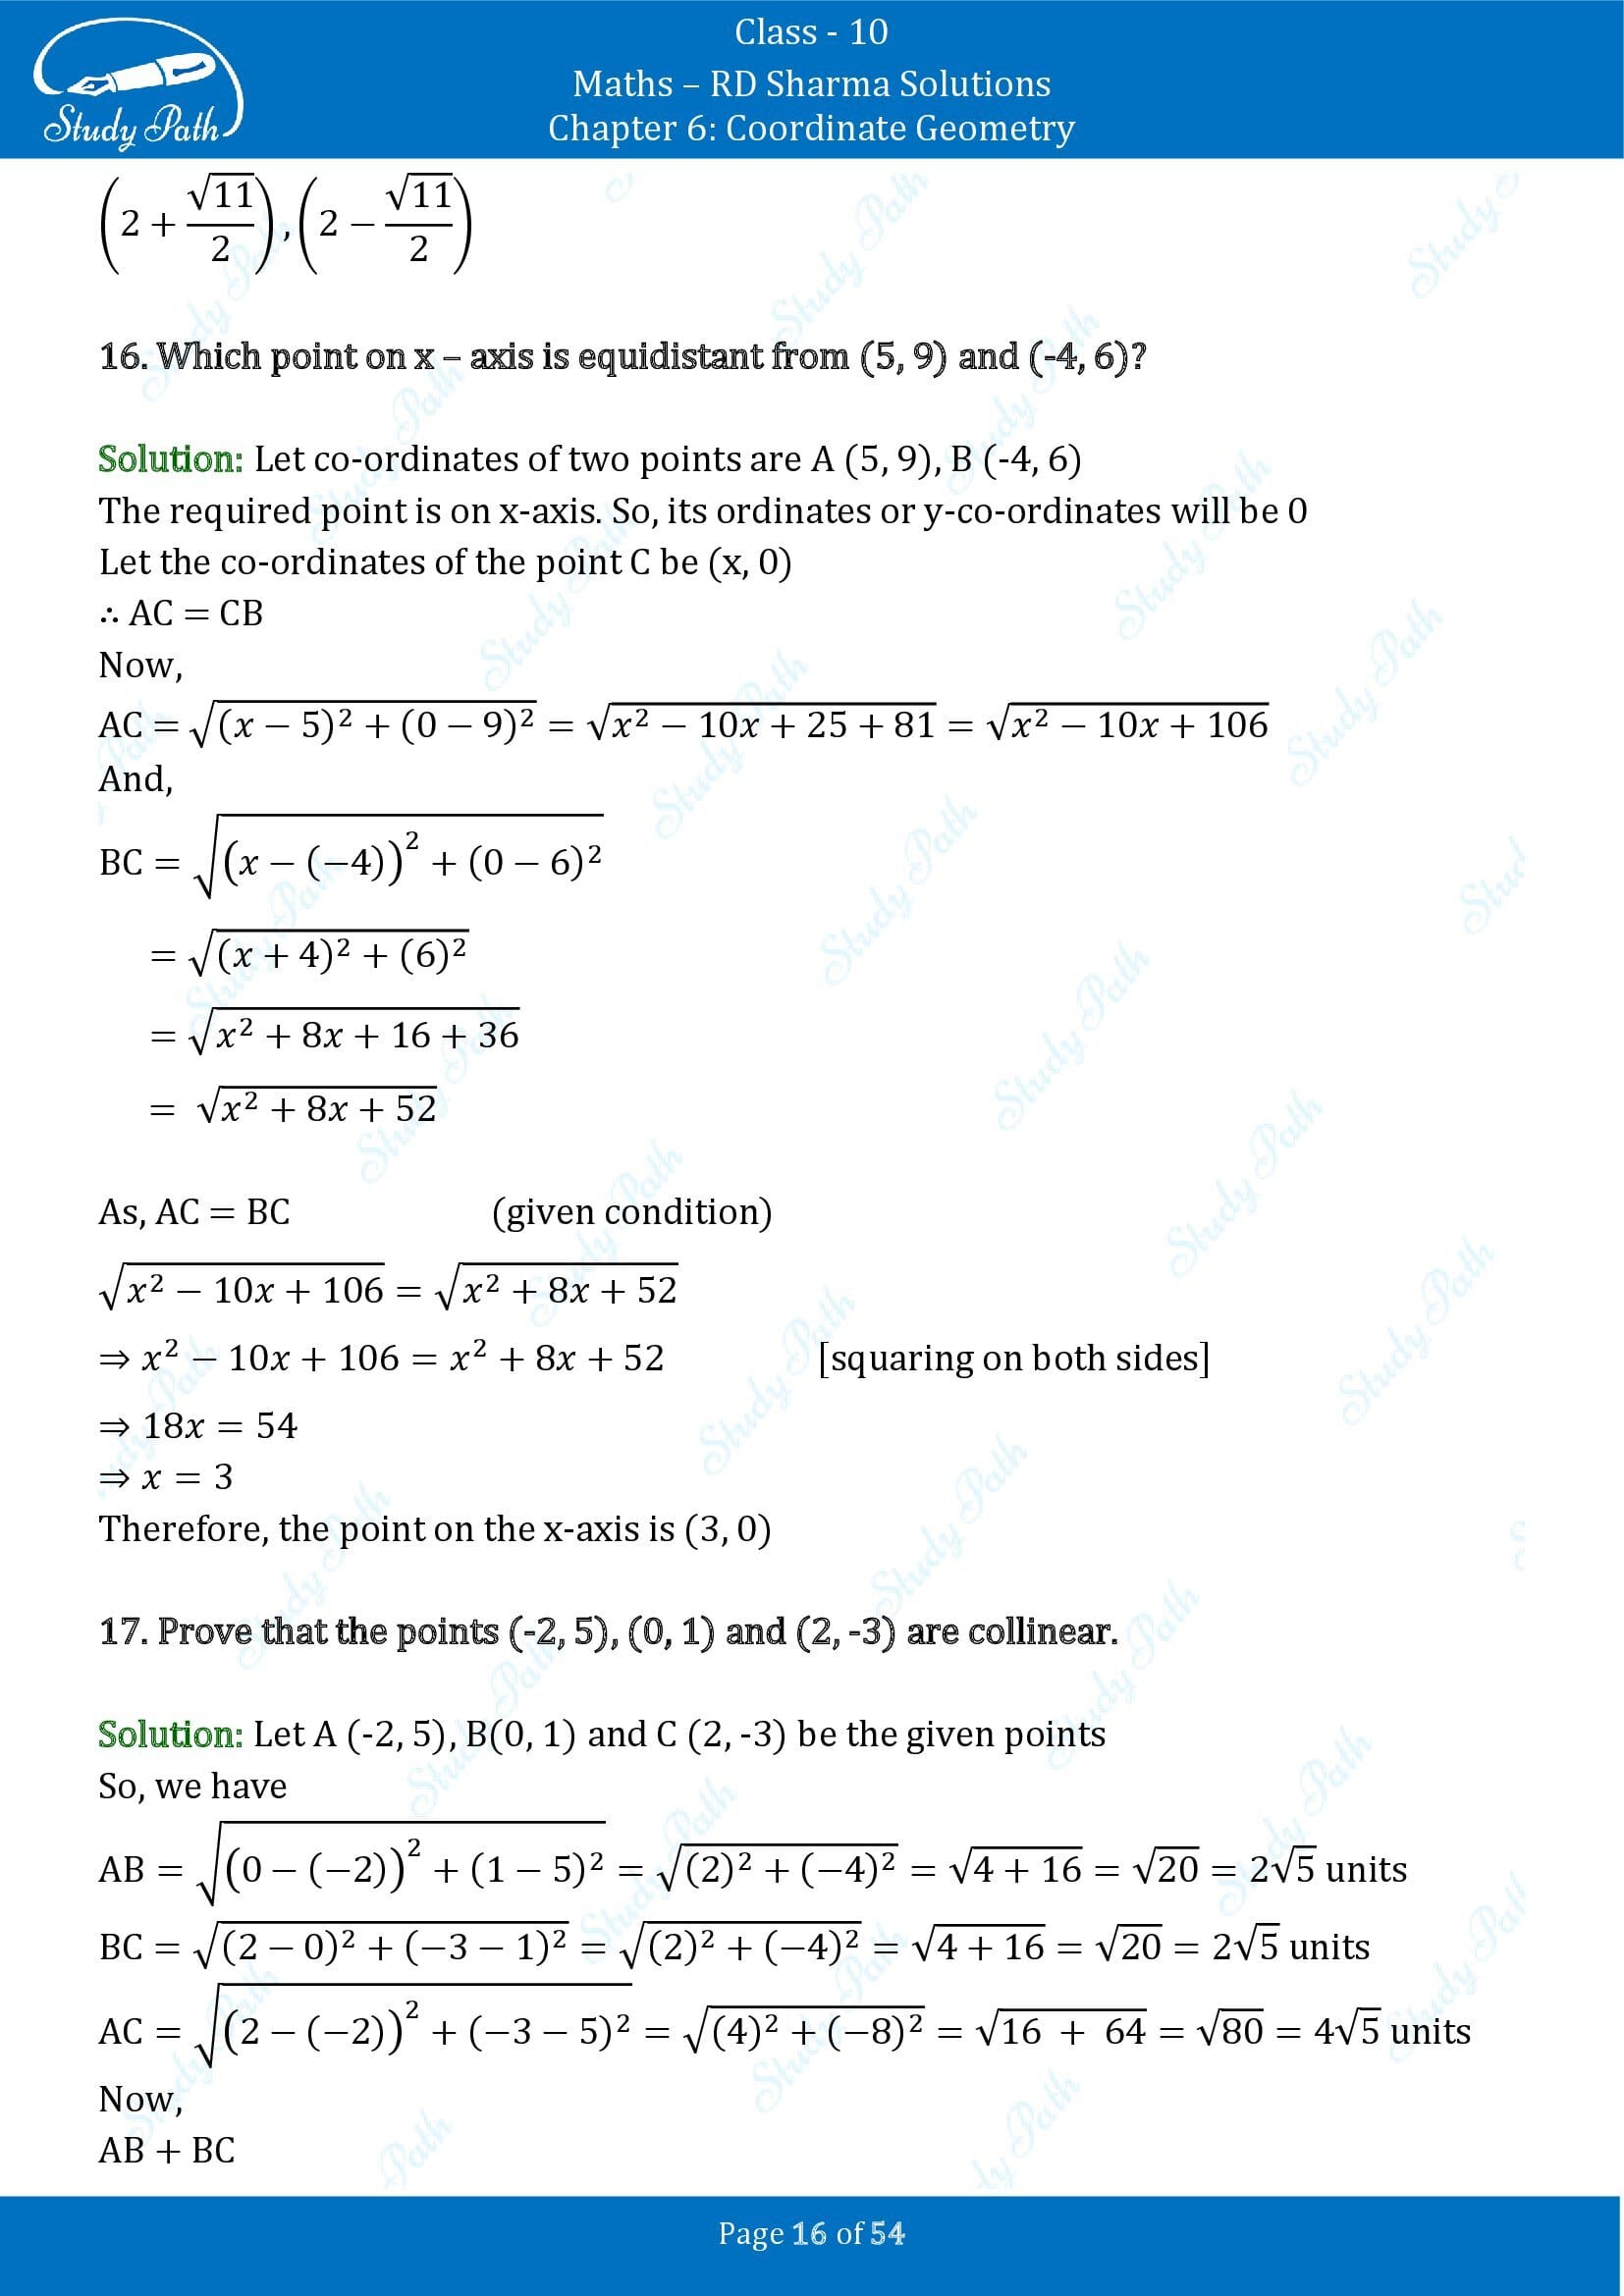 RD Sharma Solutions Class 10 Chapter 6 Coordinate Geometry Exercise 6.2 0016